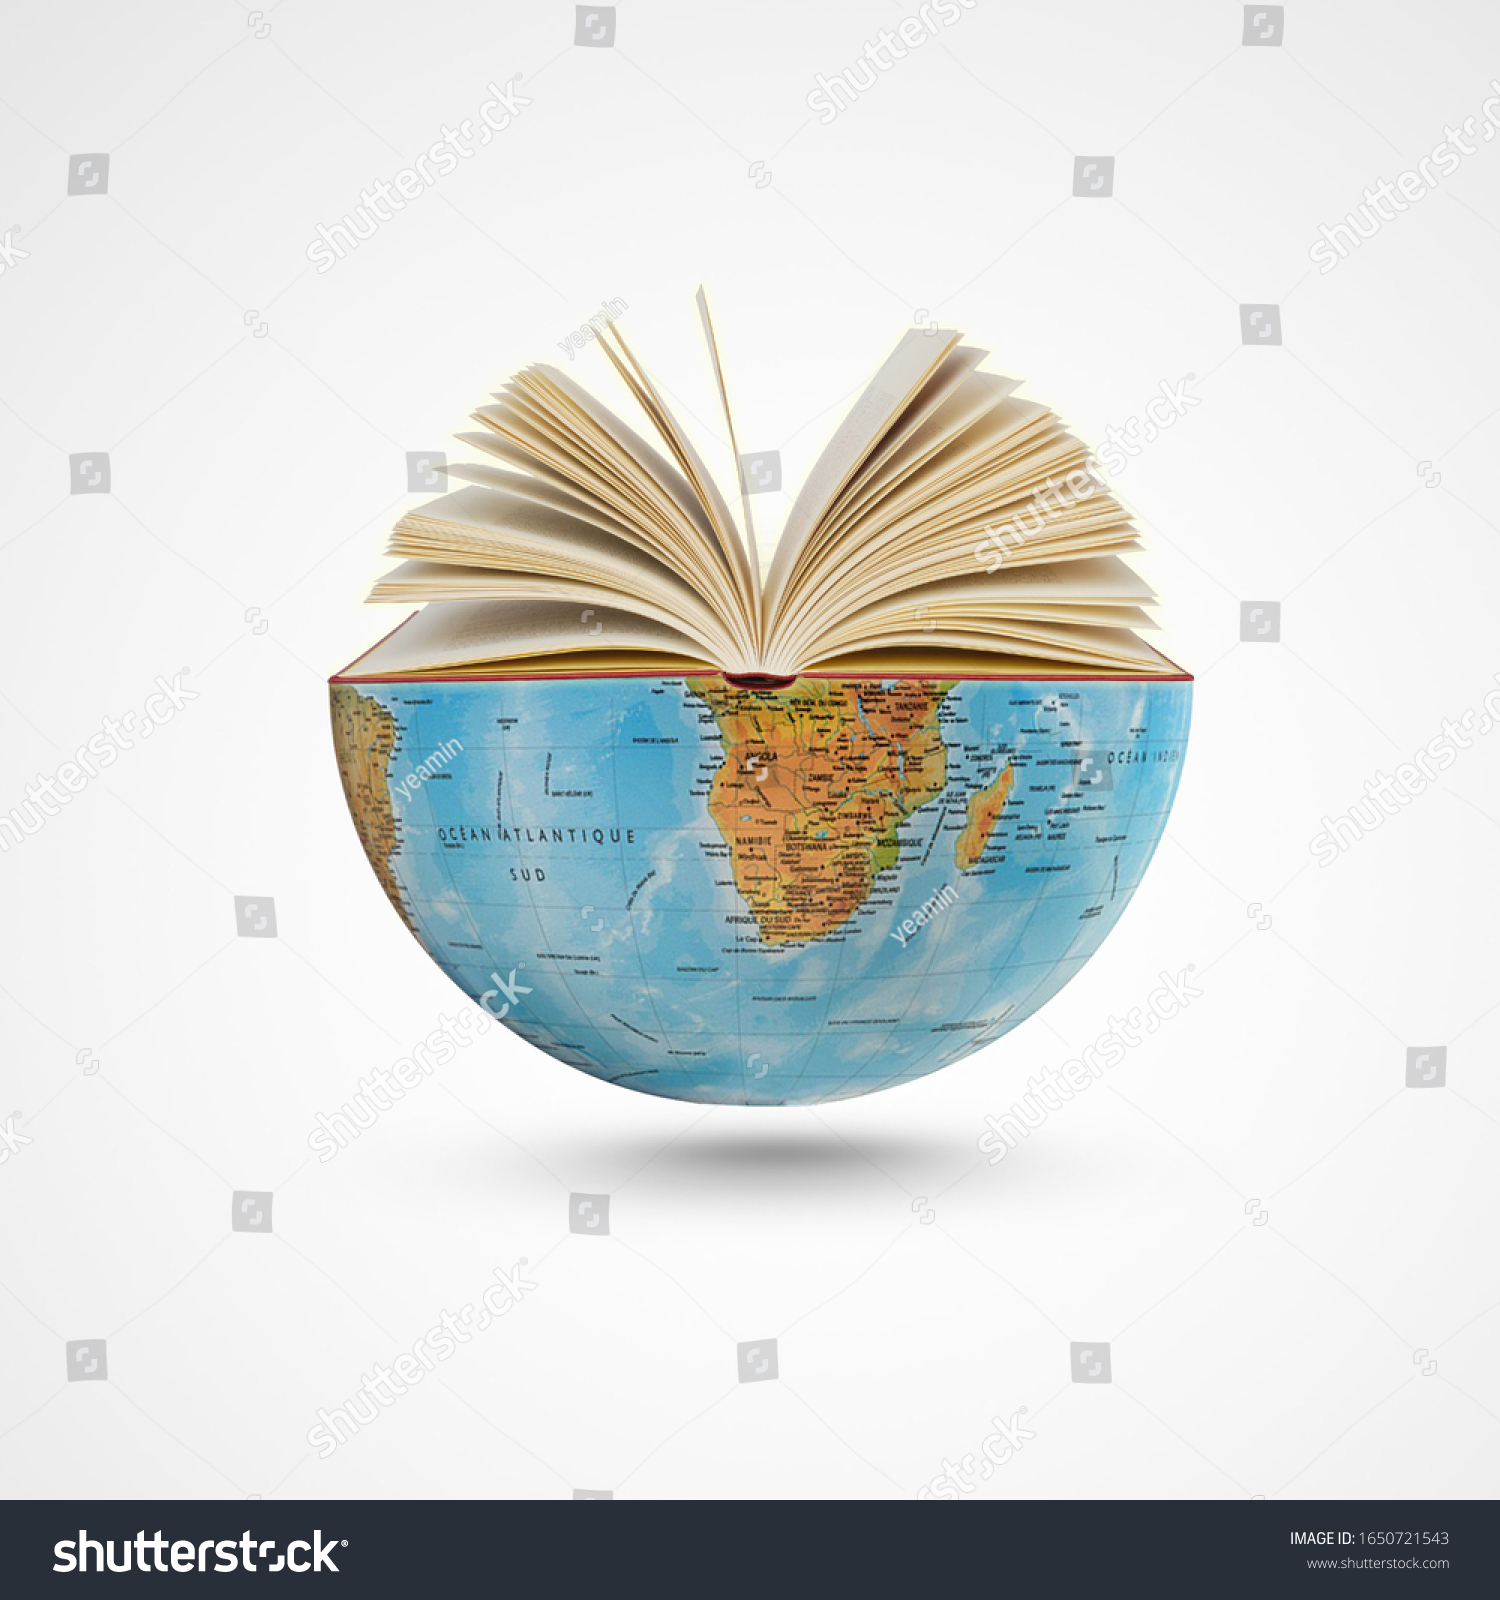 world book day,23th April, open book over the Planet on isolated white background, Mental Health Day concept, books pile and globe,World literature concept, Knowledge information, earth day concept, #1650721543